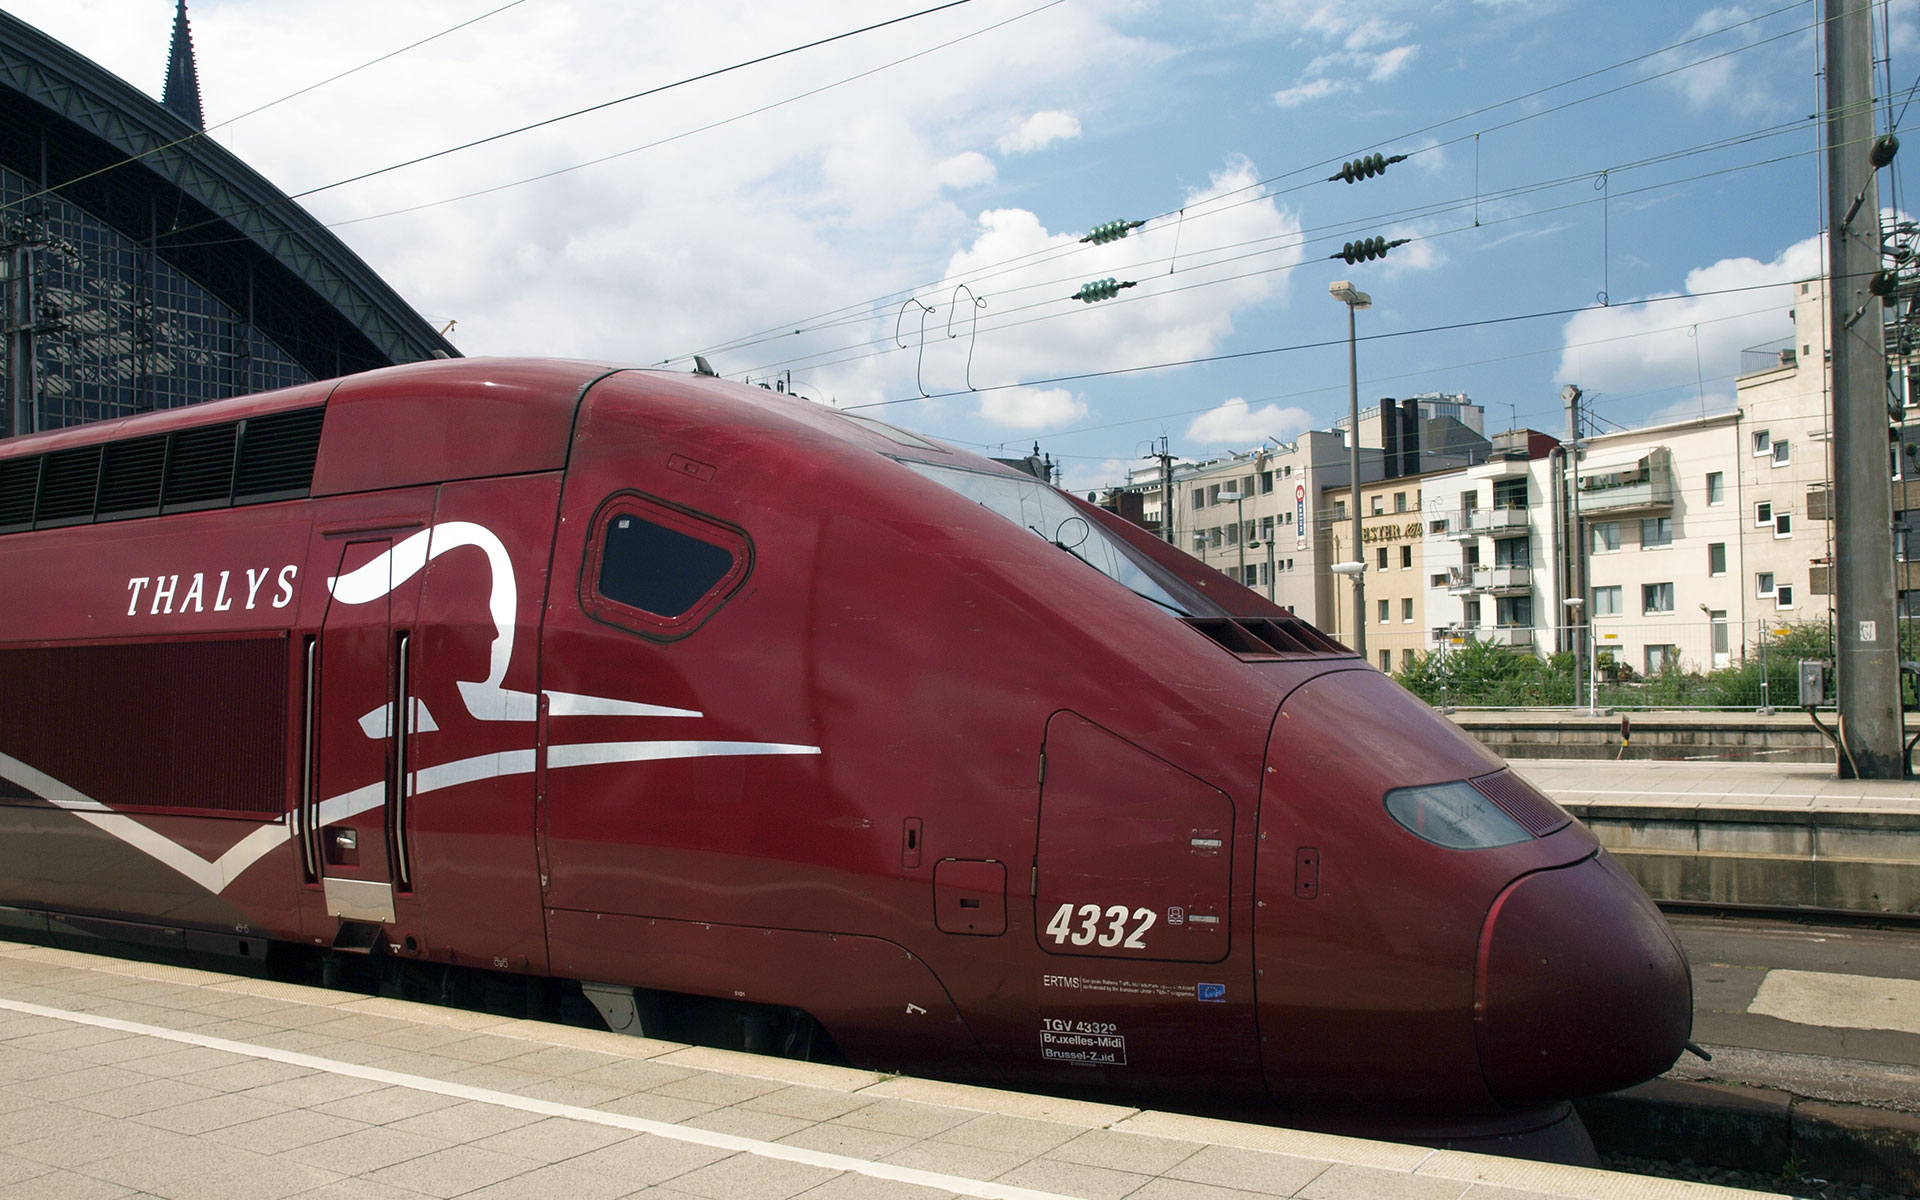 A Thalys train at Cologne station, Germany (photo © hidden europe).